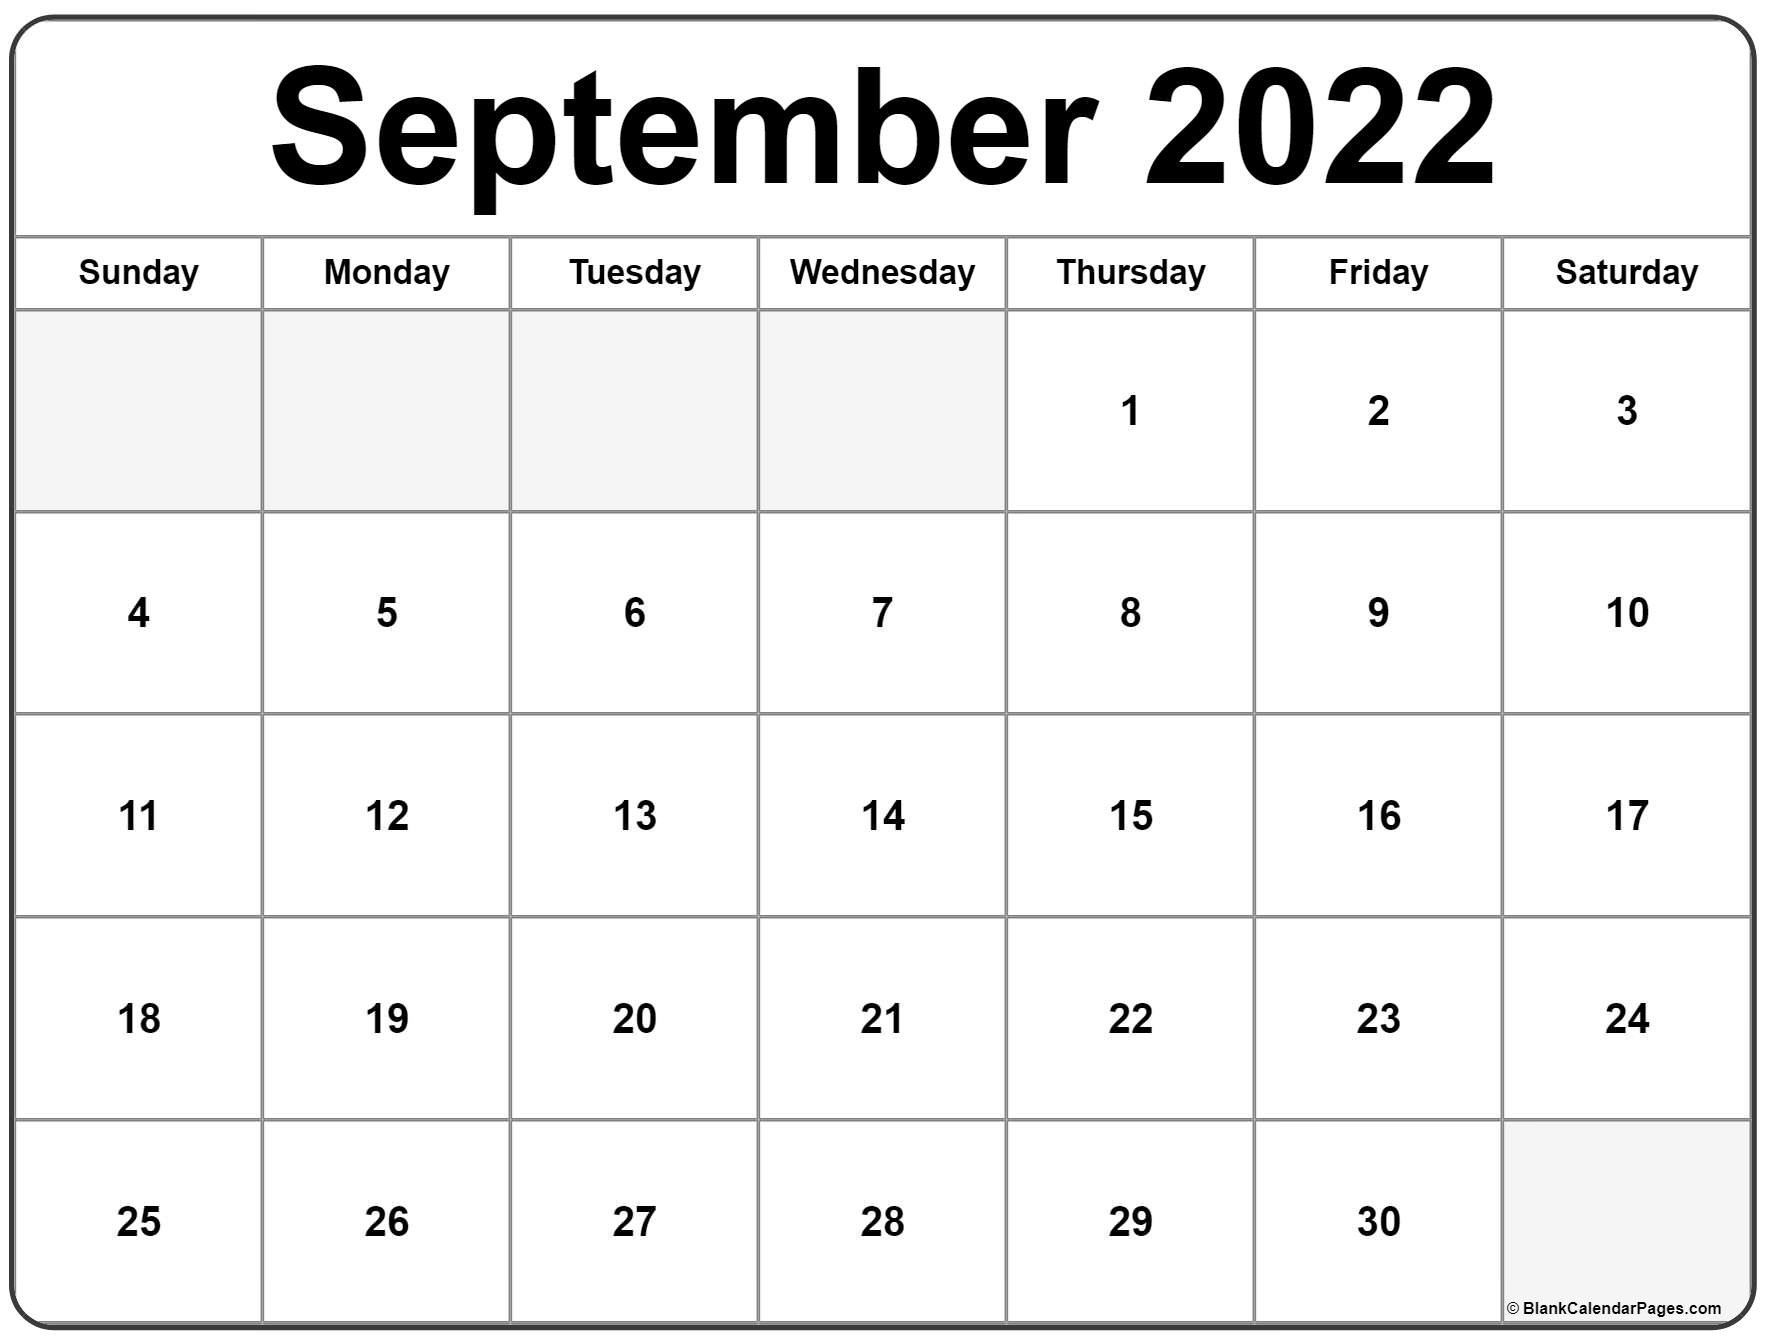 Printable Monthly Calendars For 2022 | Free Printable Calendar Monthly within Calendar September 2022 To August 2022